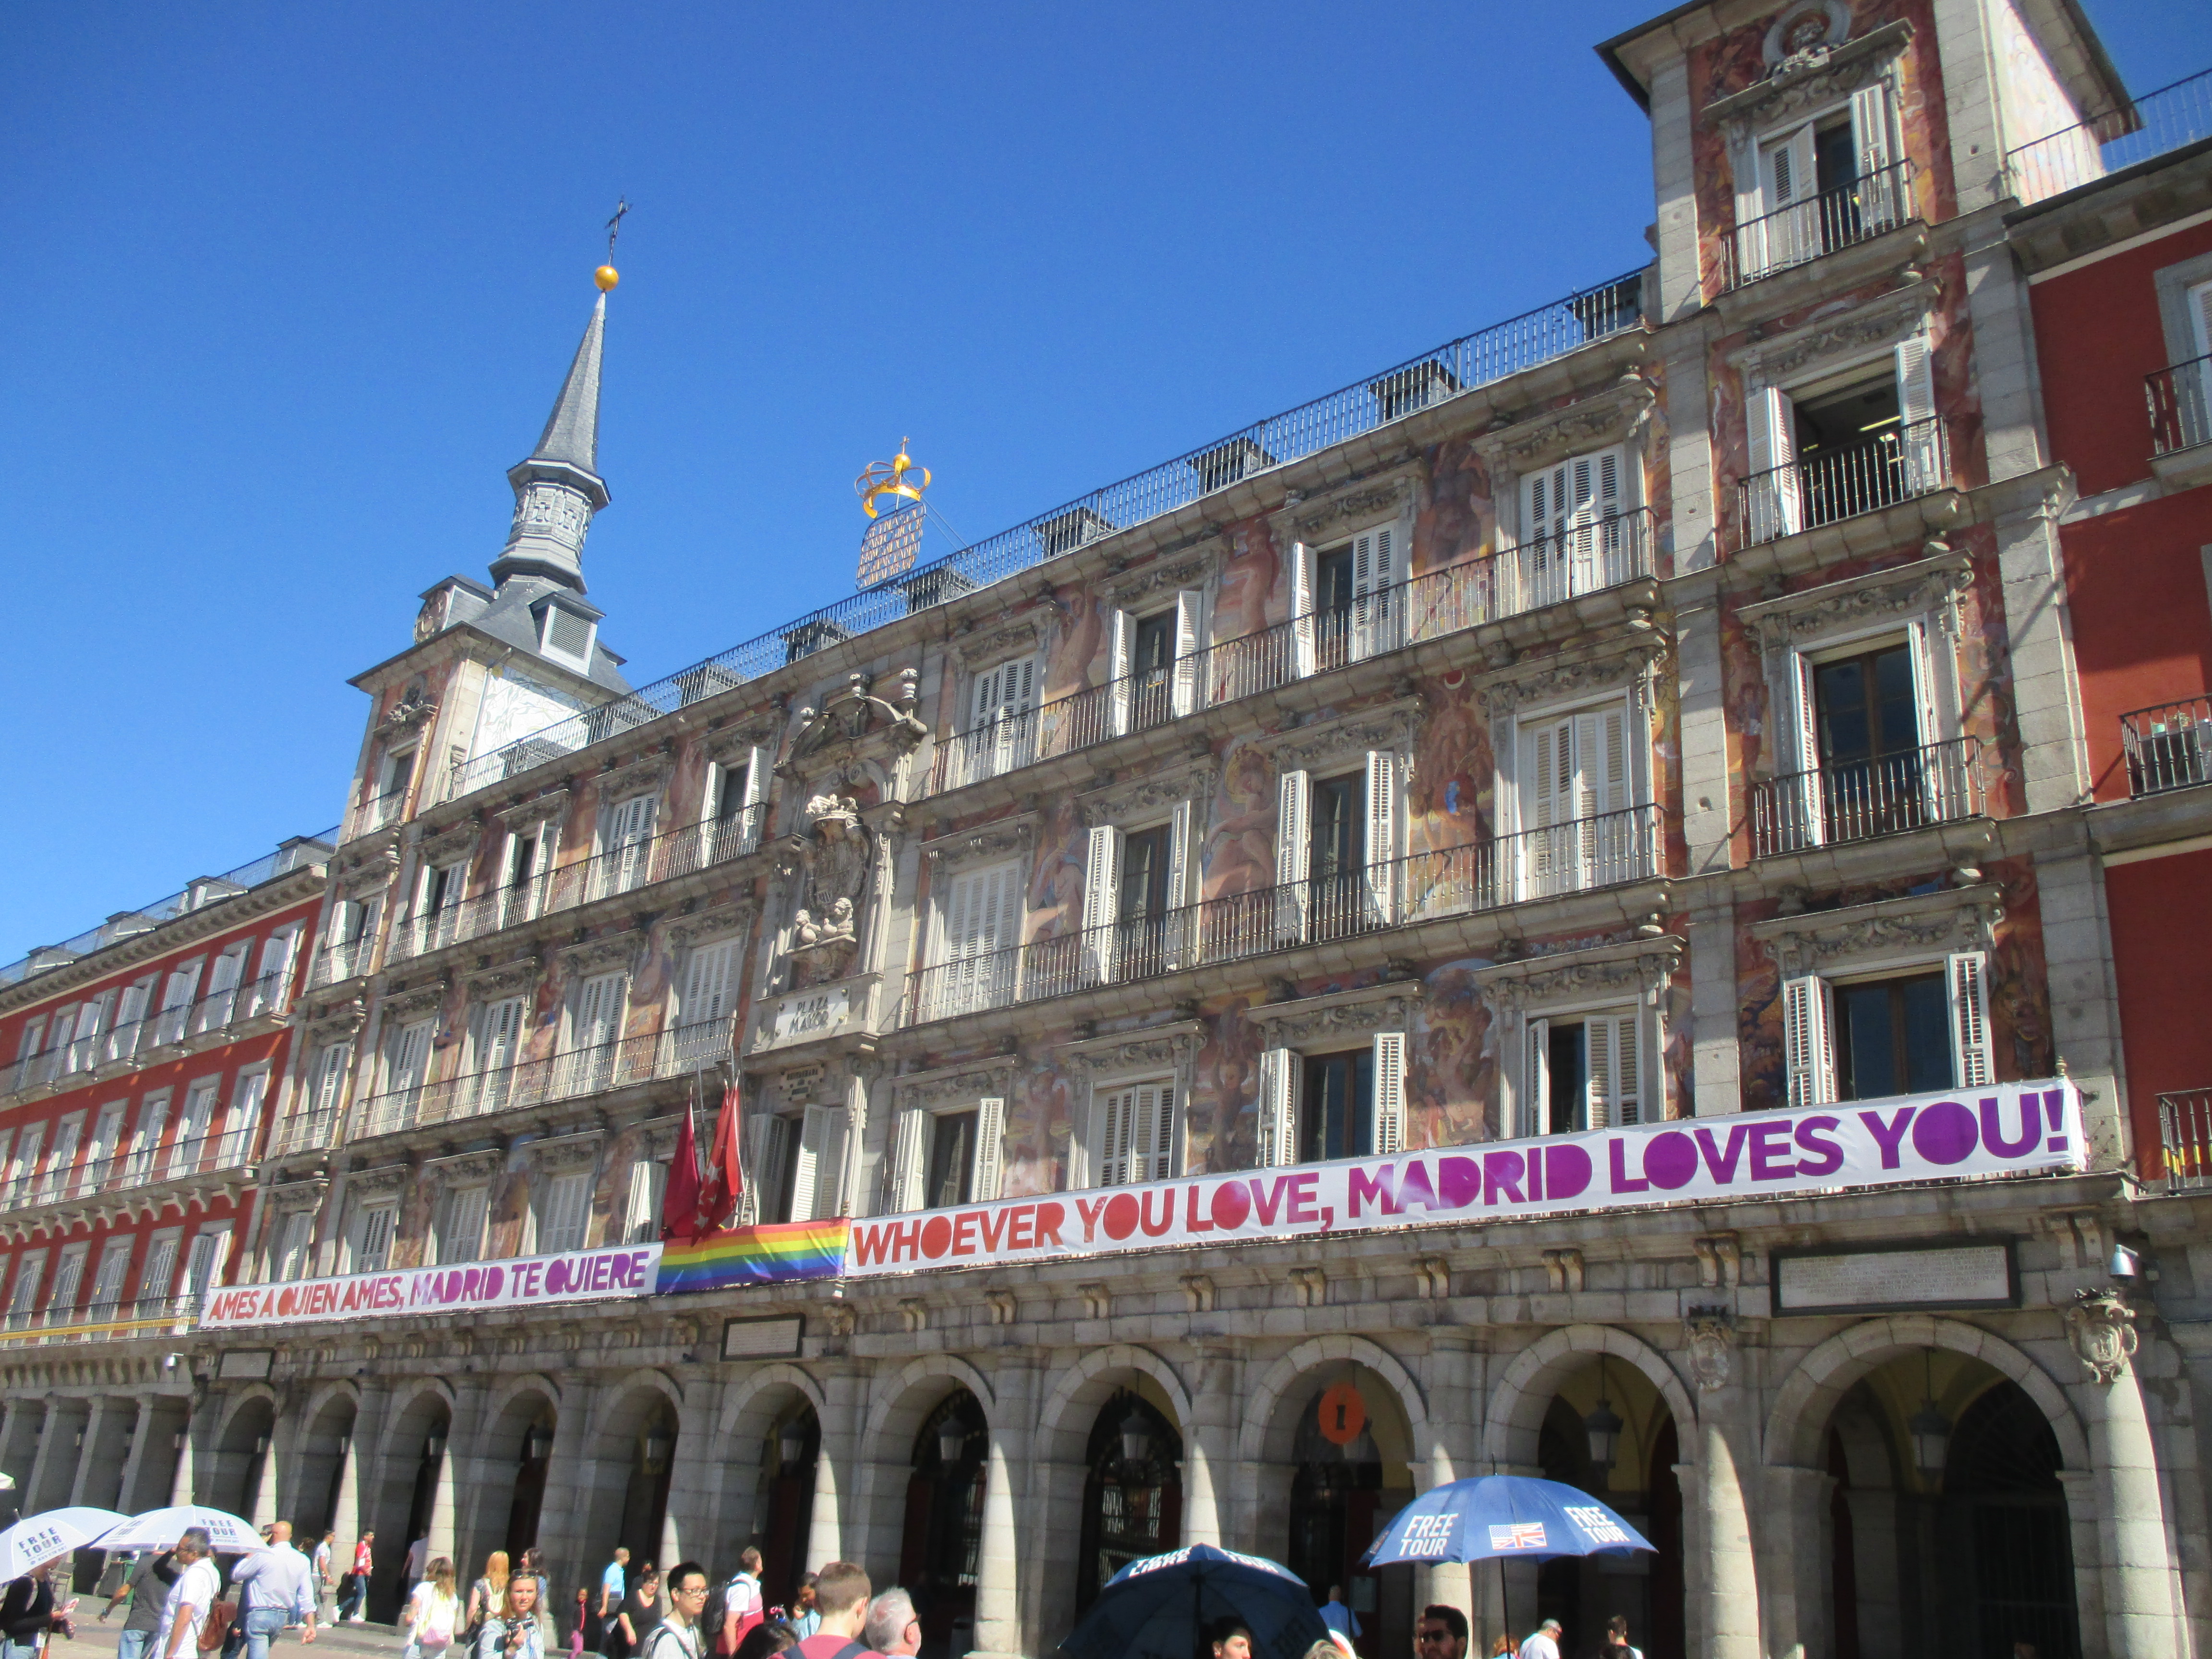 Madrid’s historic Plaza Mayor, celebrating its 400th birthday this year, is also celebrating Pride with the city’s slogan, Whoever you love, Madrid Loves you.